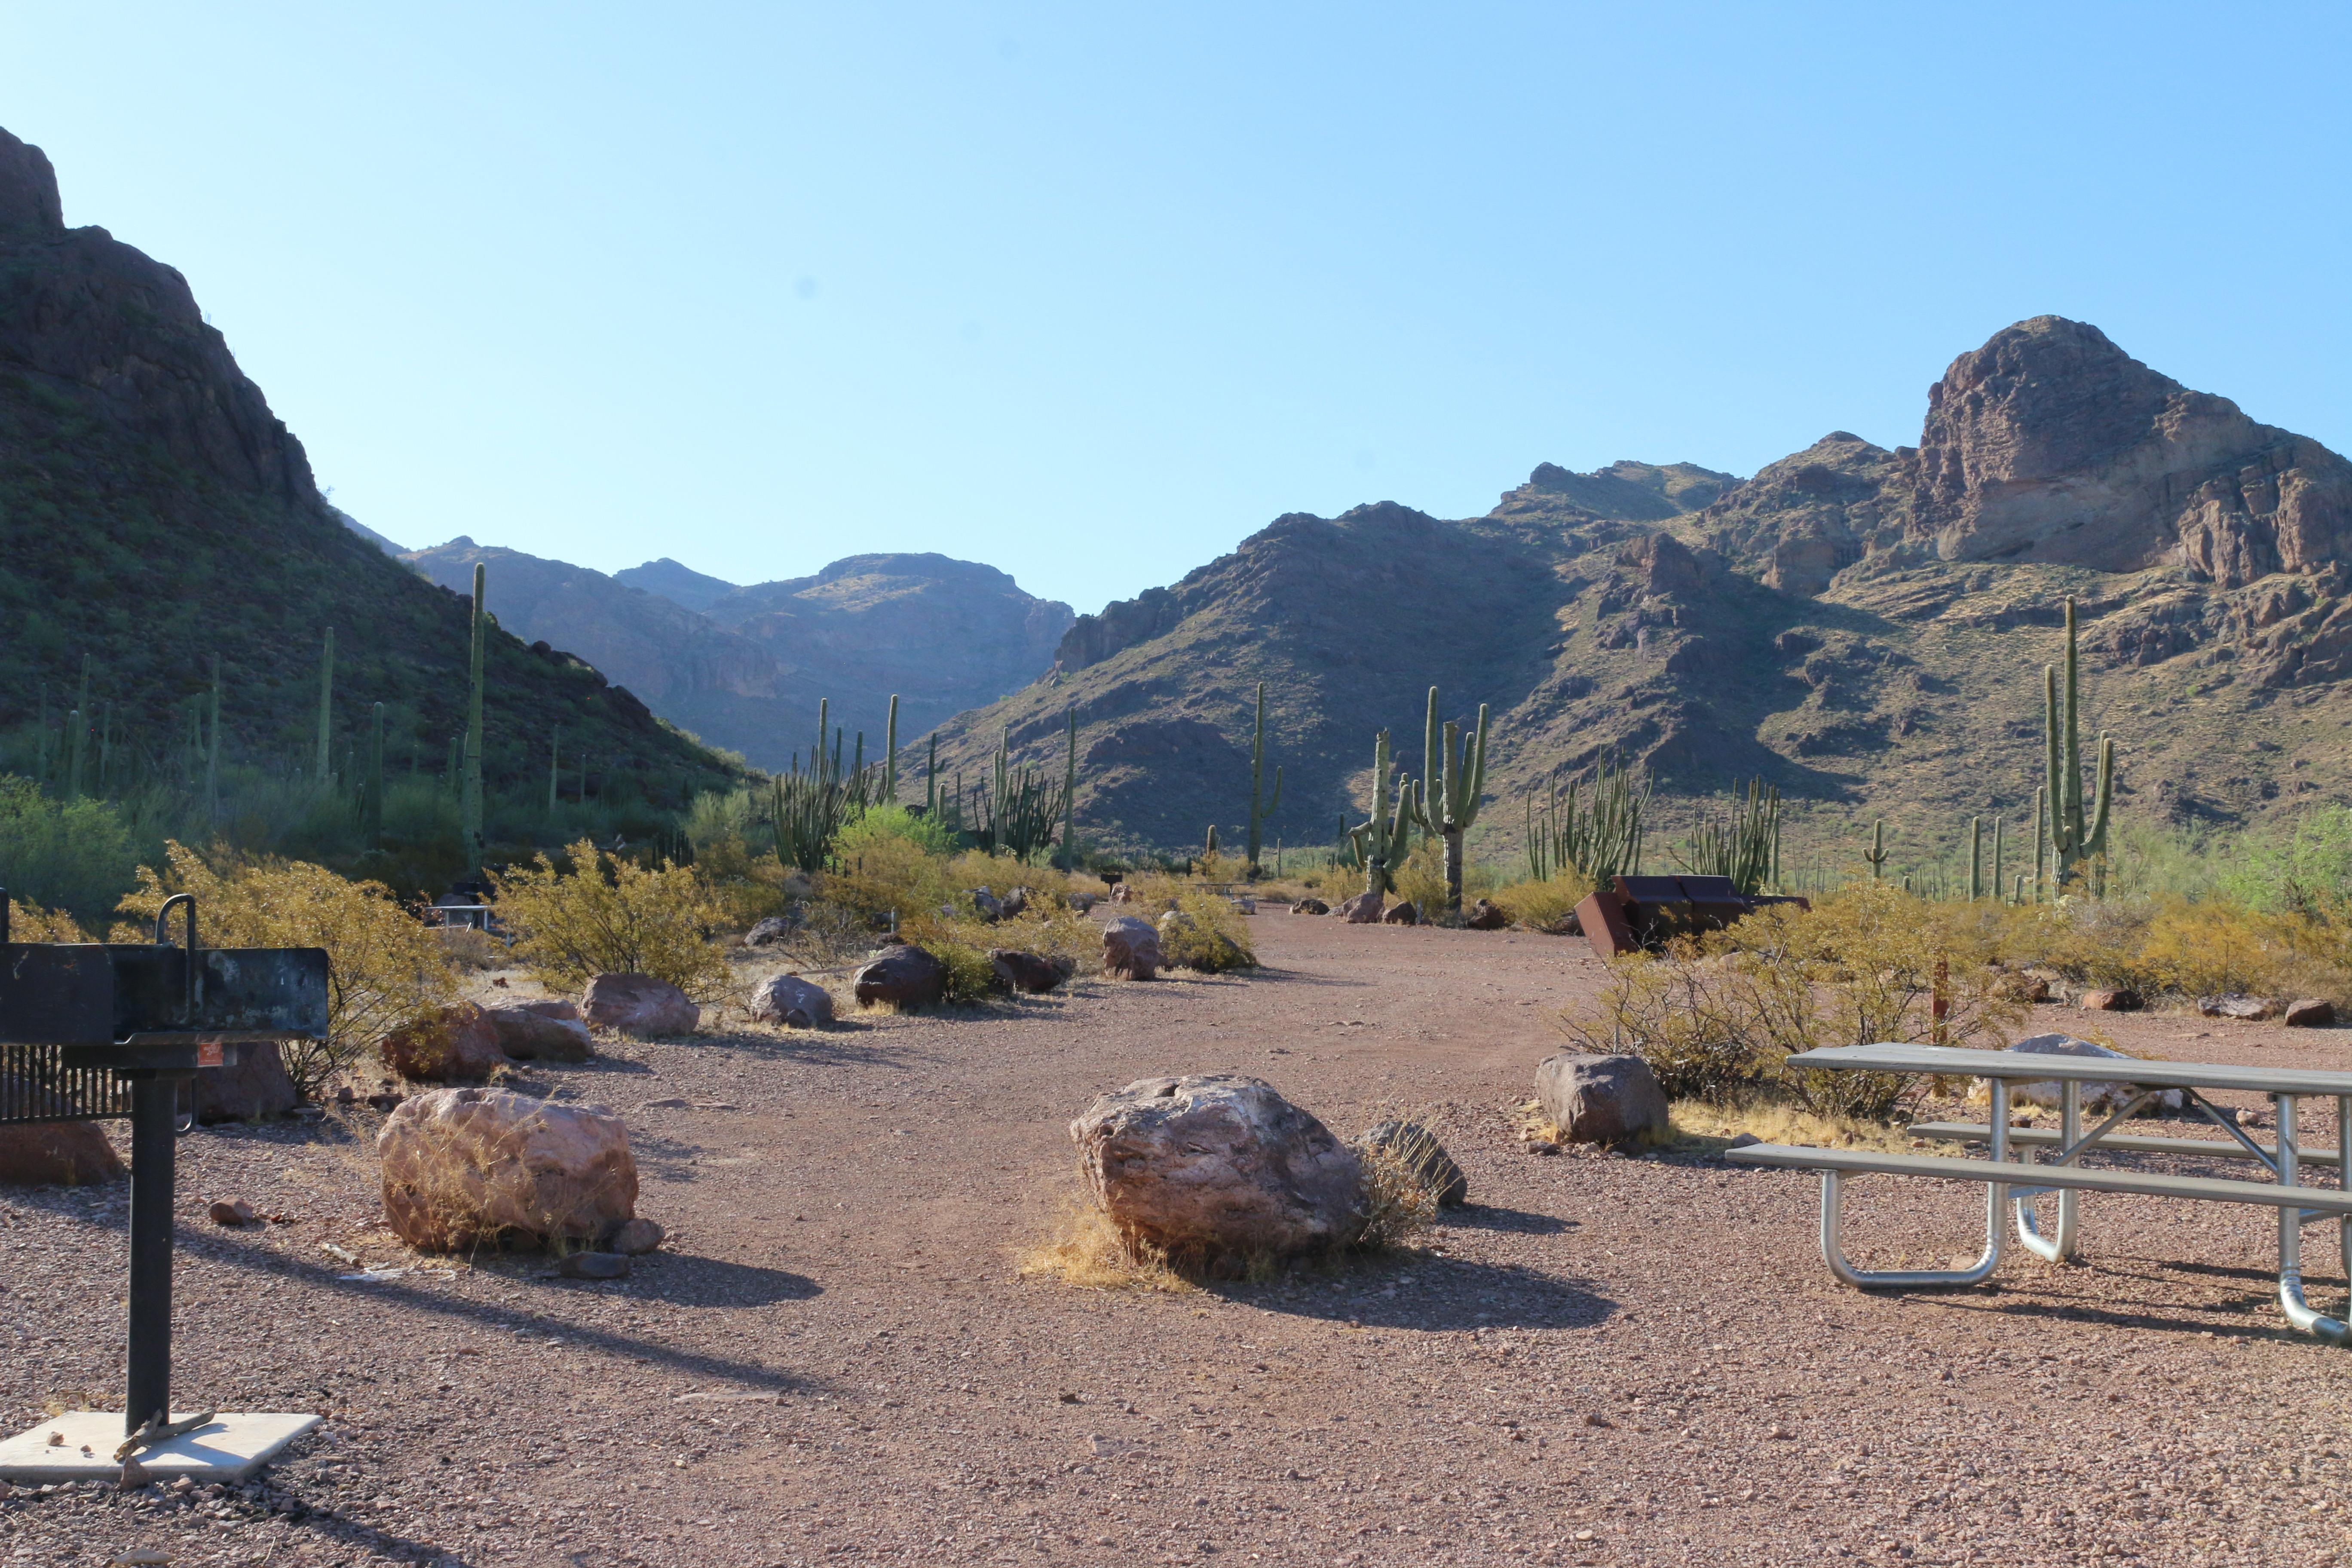 Campground site with a picnic table and standing grill, with mountains and canyon in the background